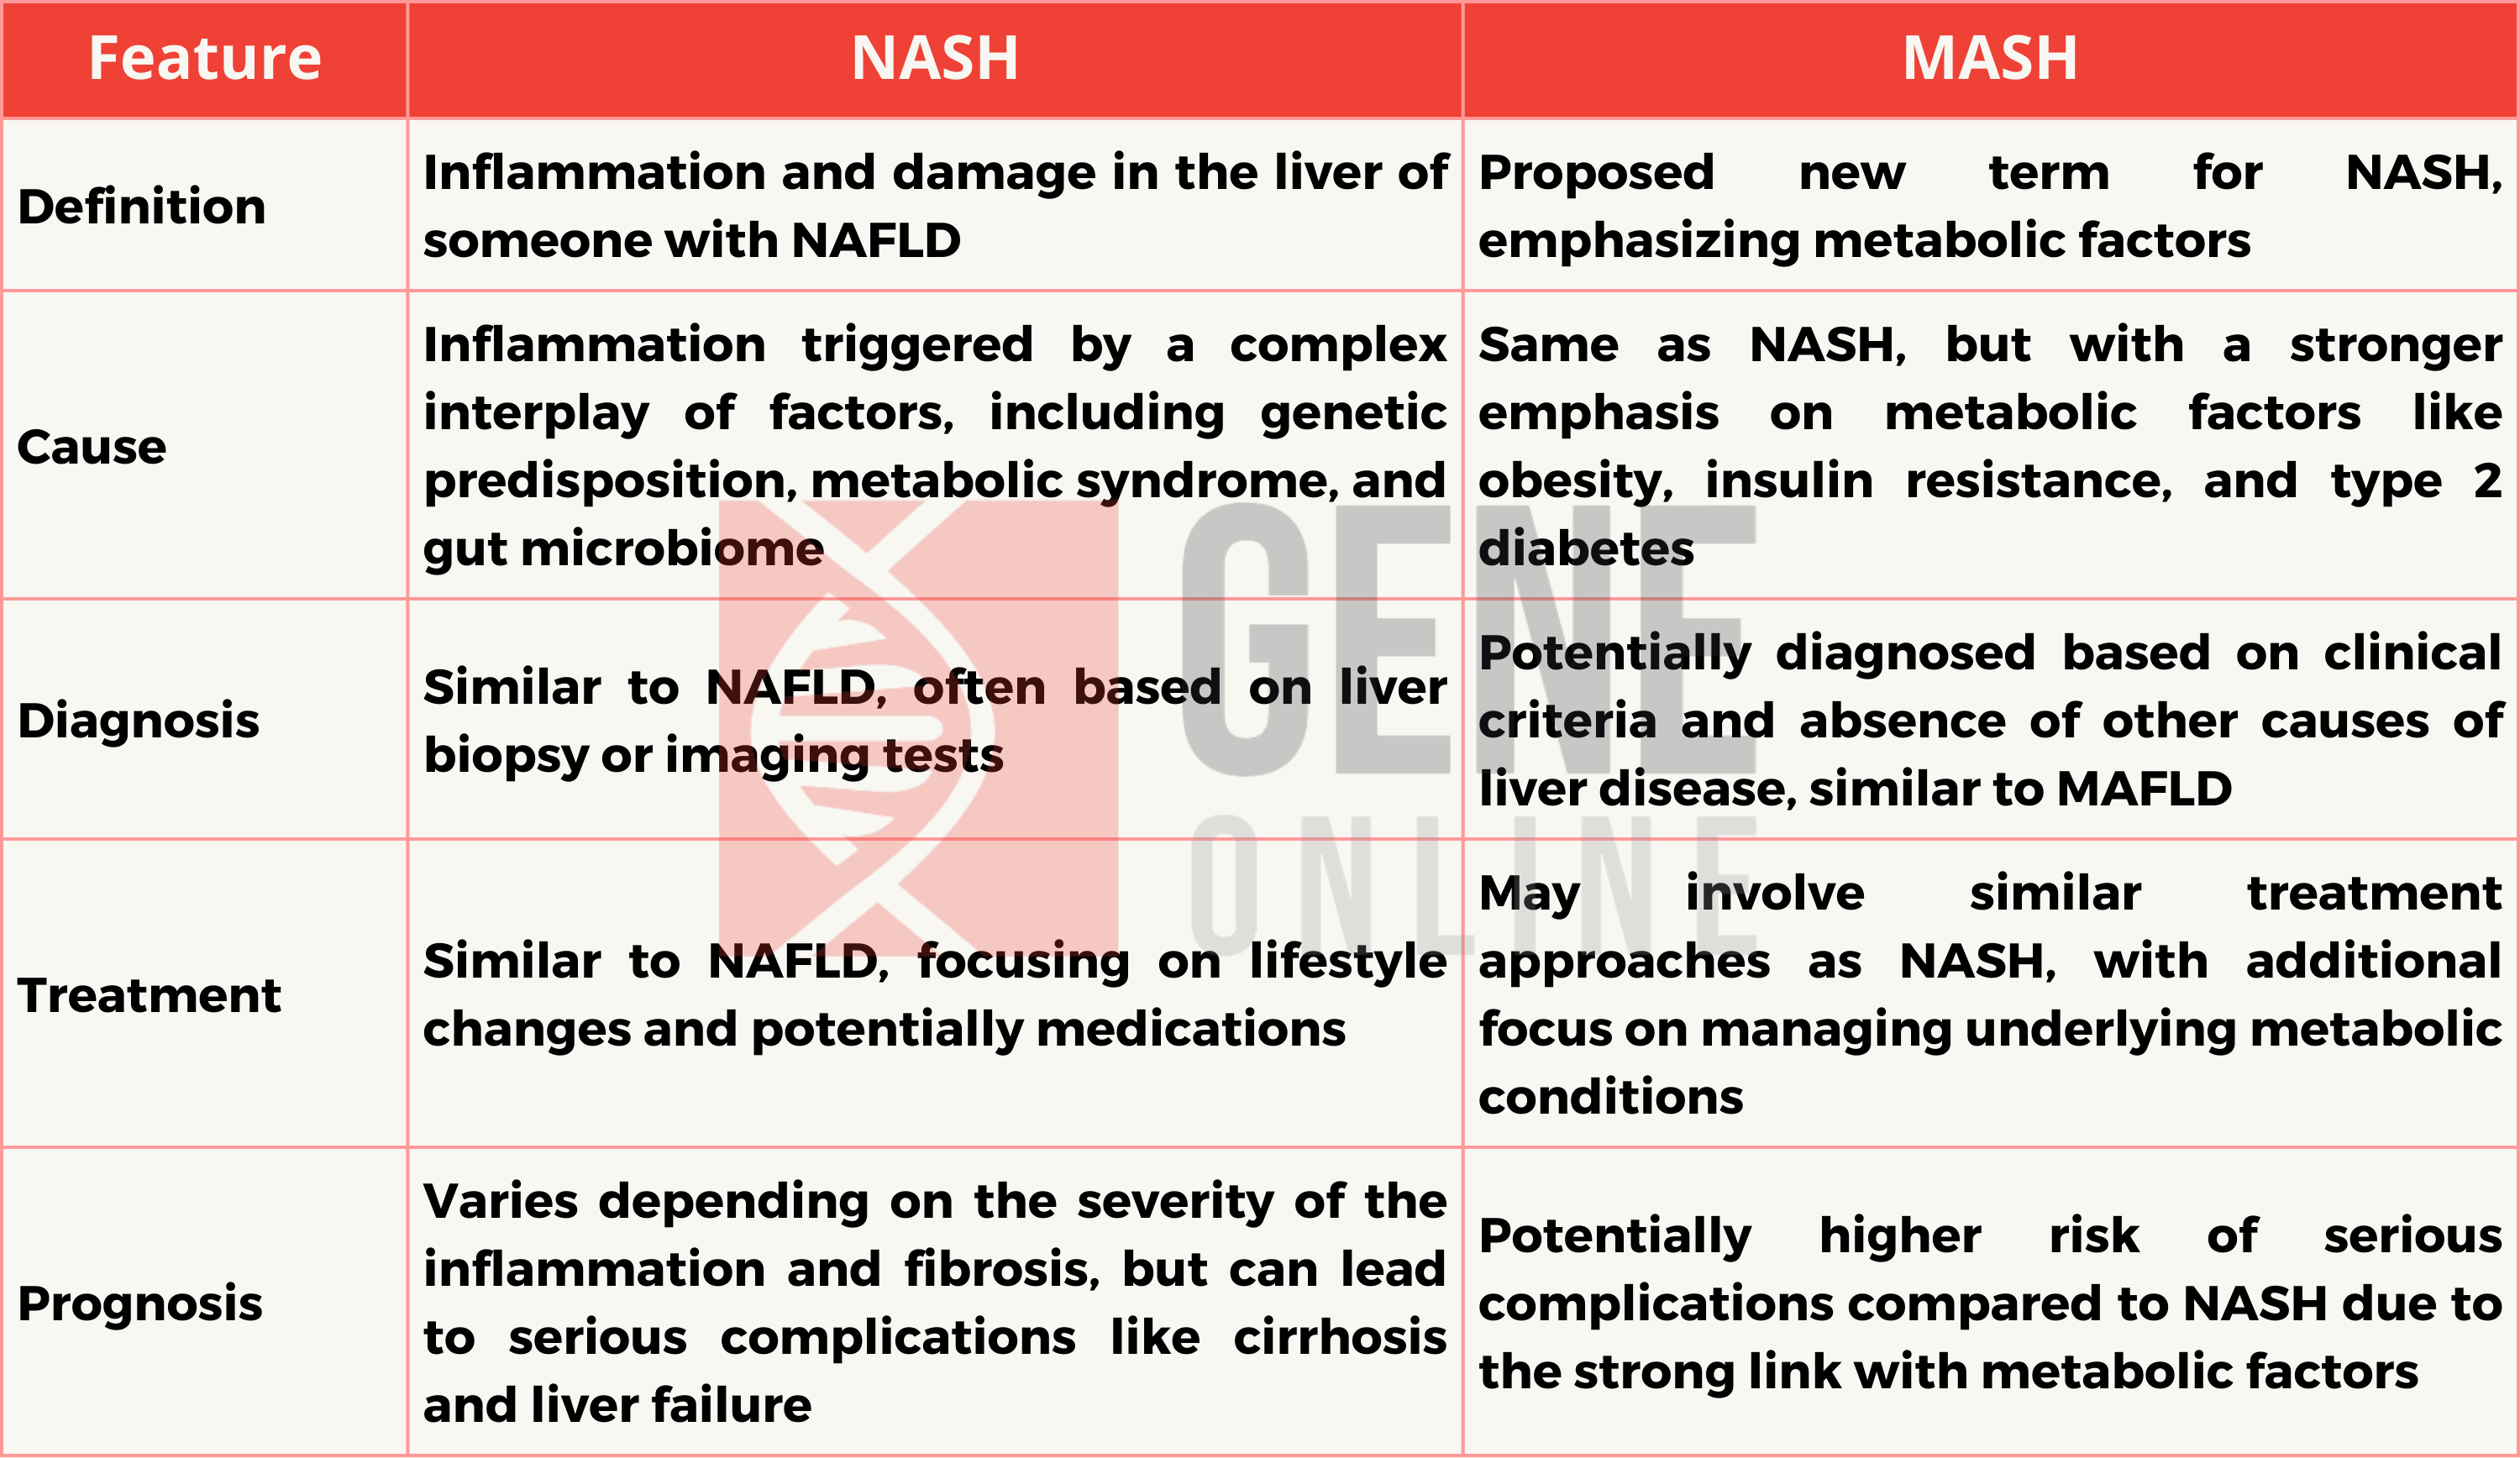 Key Differences of NASH and MASH